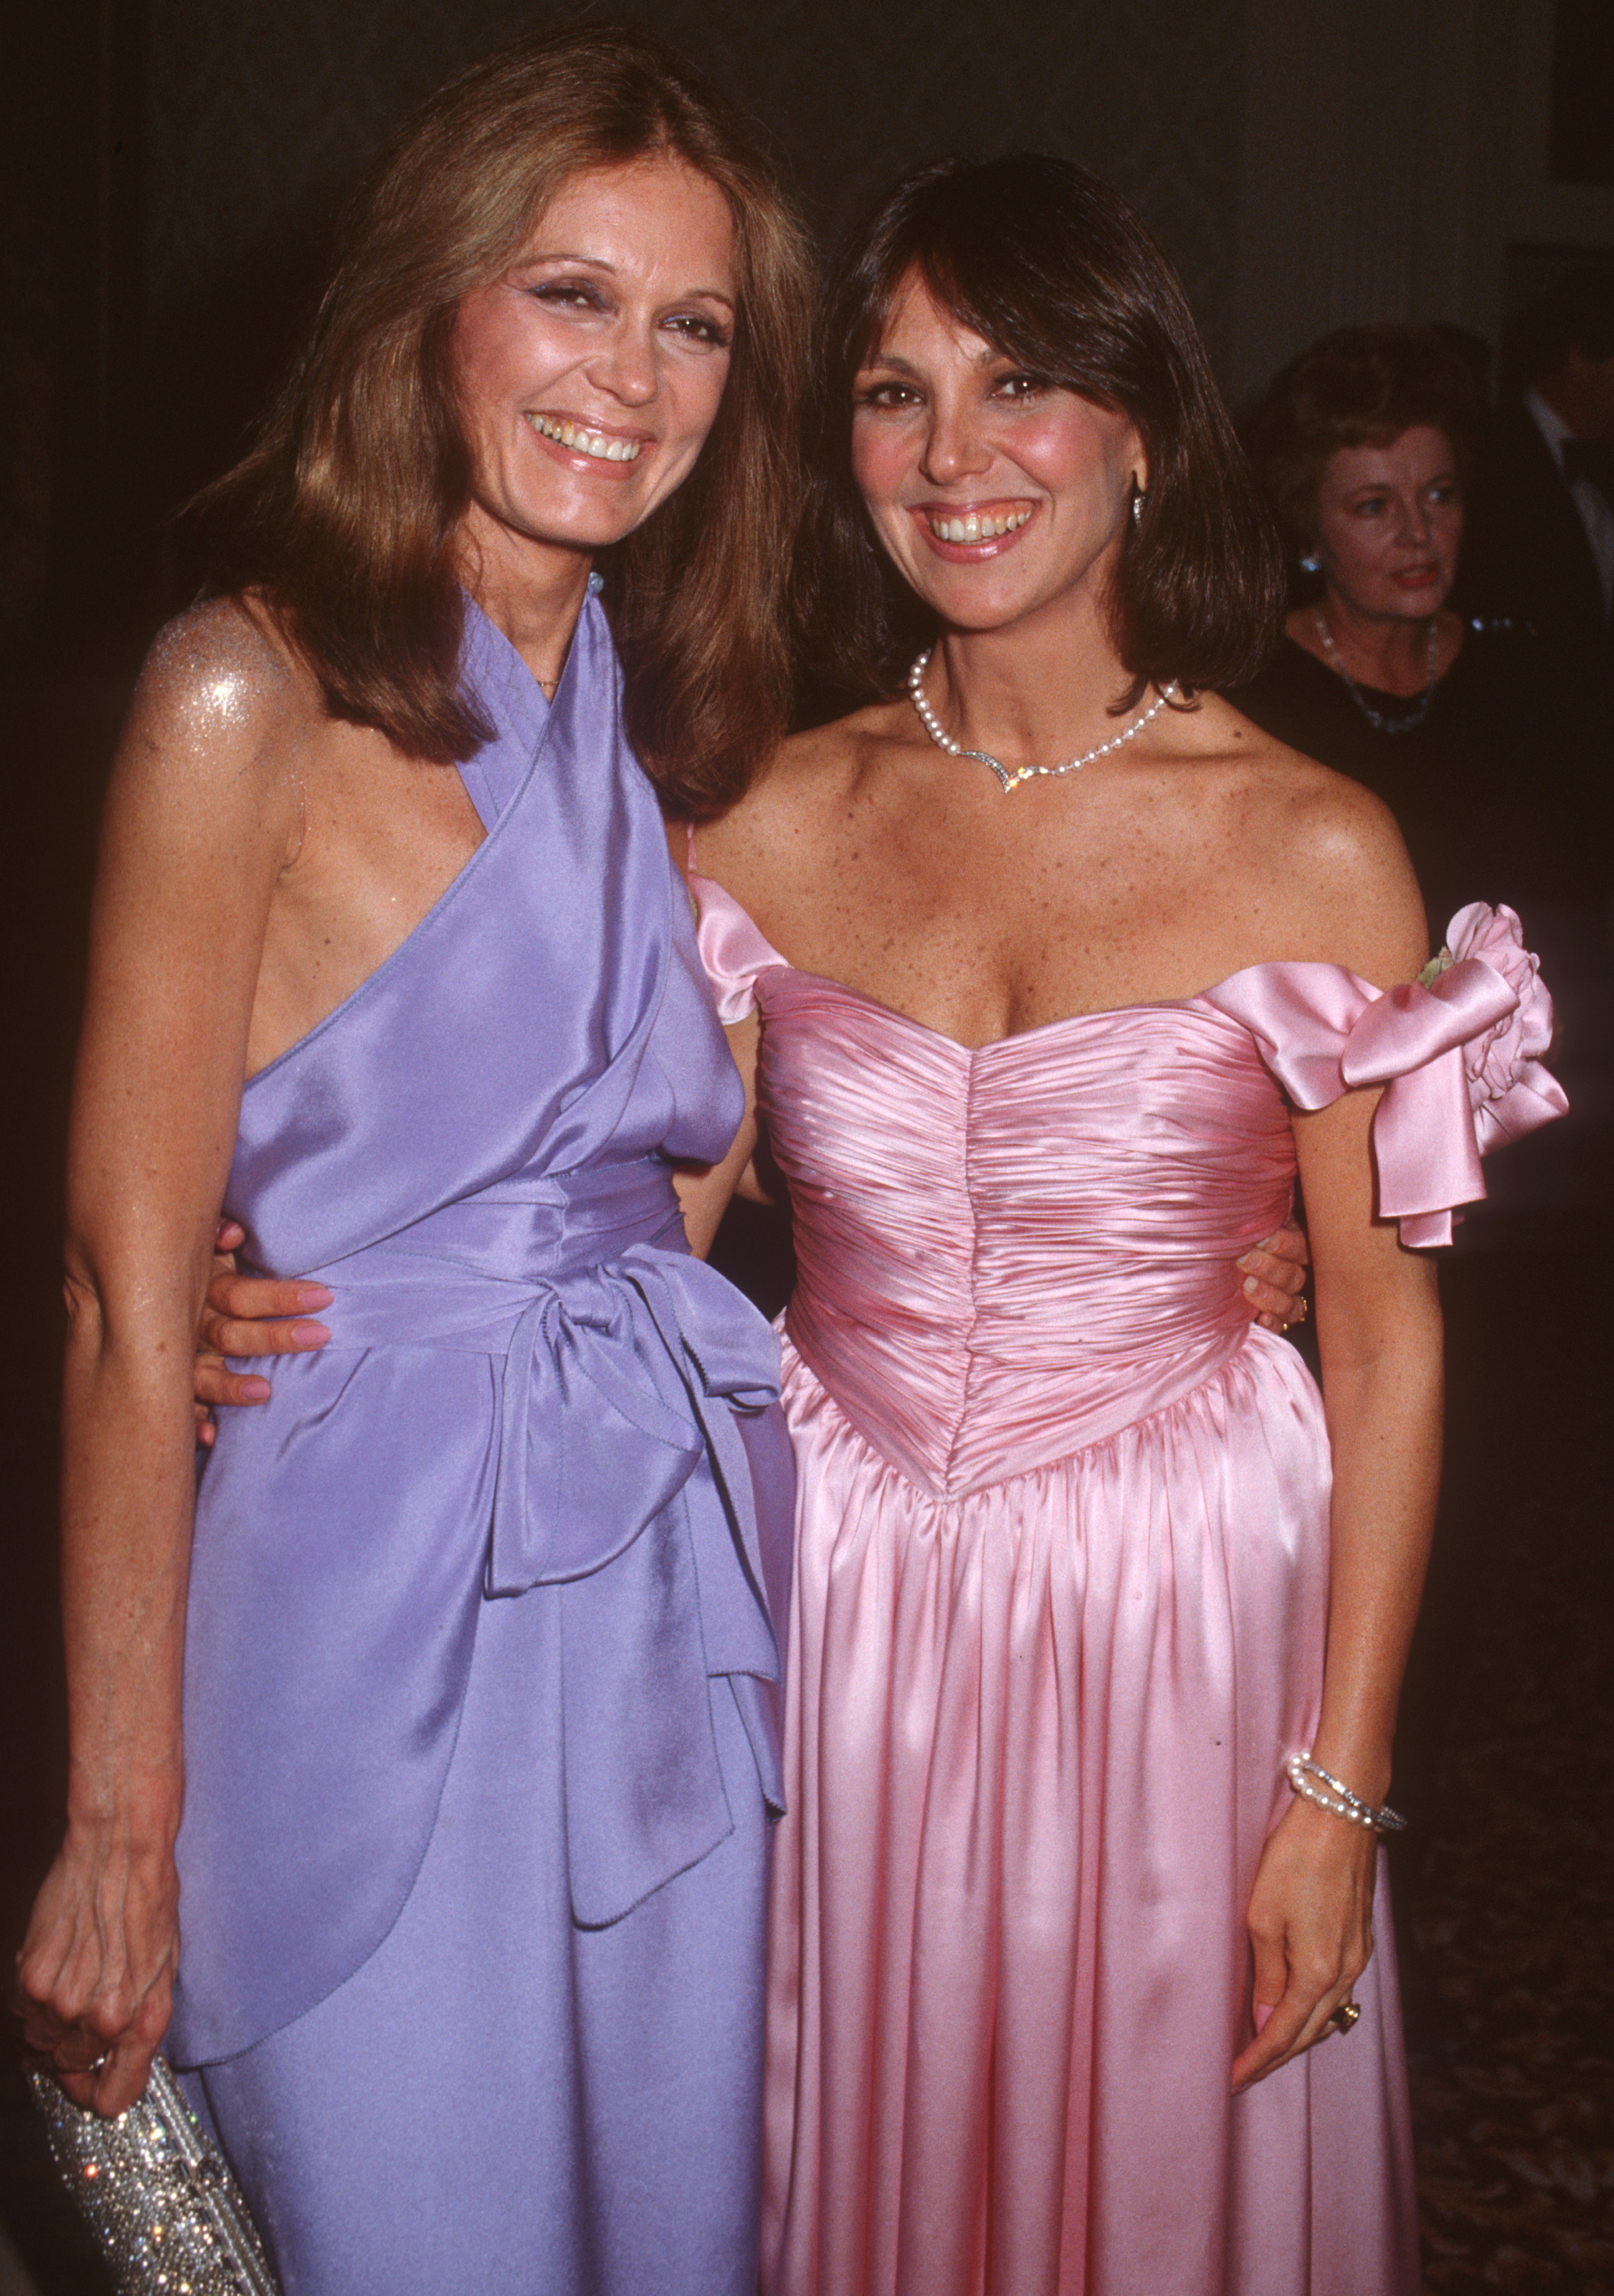 Gloria Steinem and Marlo Thomas during Gloria Steinem's 50th Birthday Party on May 23, 1984, at Waldor-Astoria Hotel in New York City. (Ron Galella—WireImage/Getty Images)